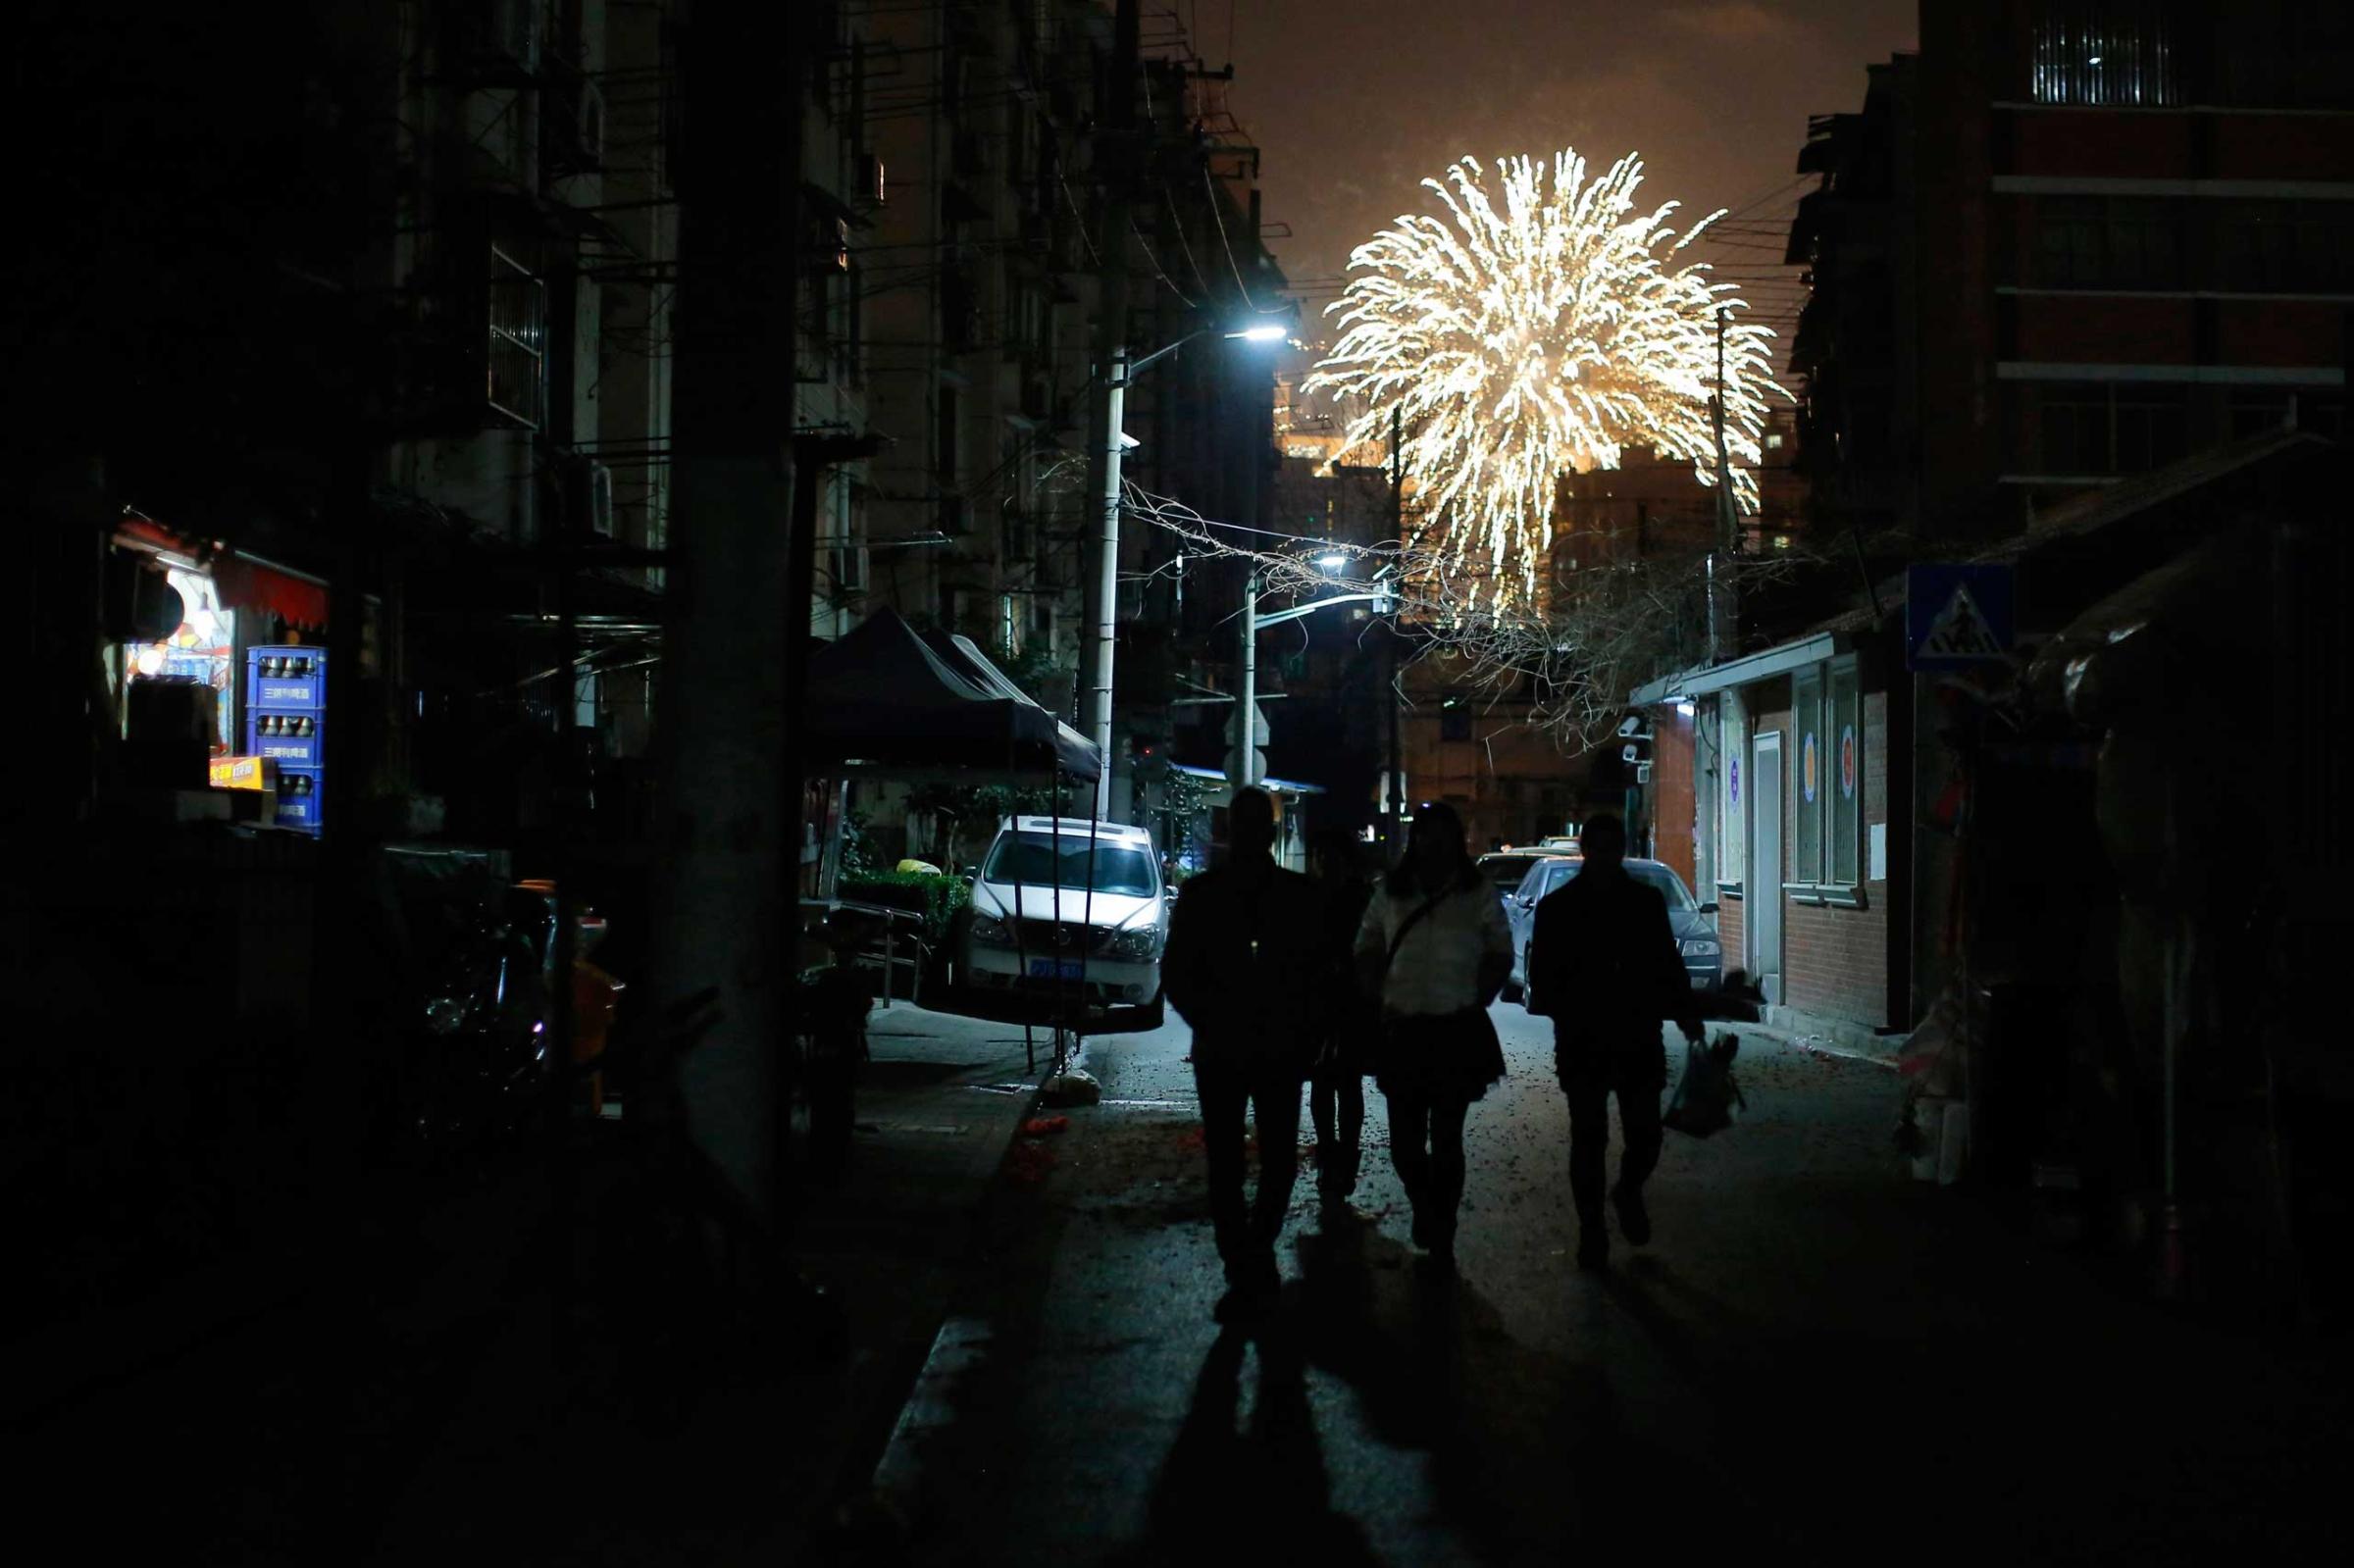 People walk as residents set off fireworks as part of Chinese New Year celebrations in Shanghai, Feb. 19, 2015.